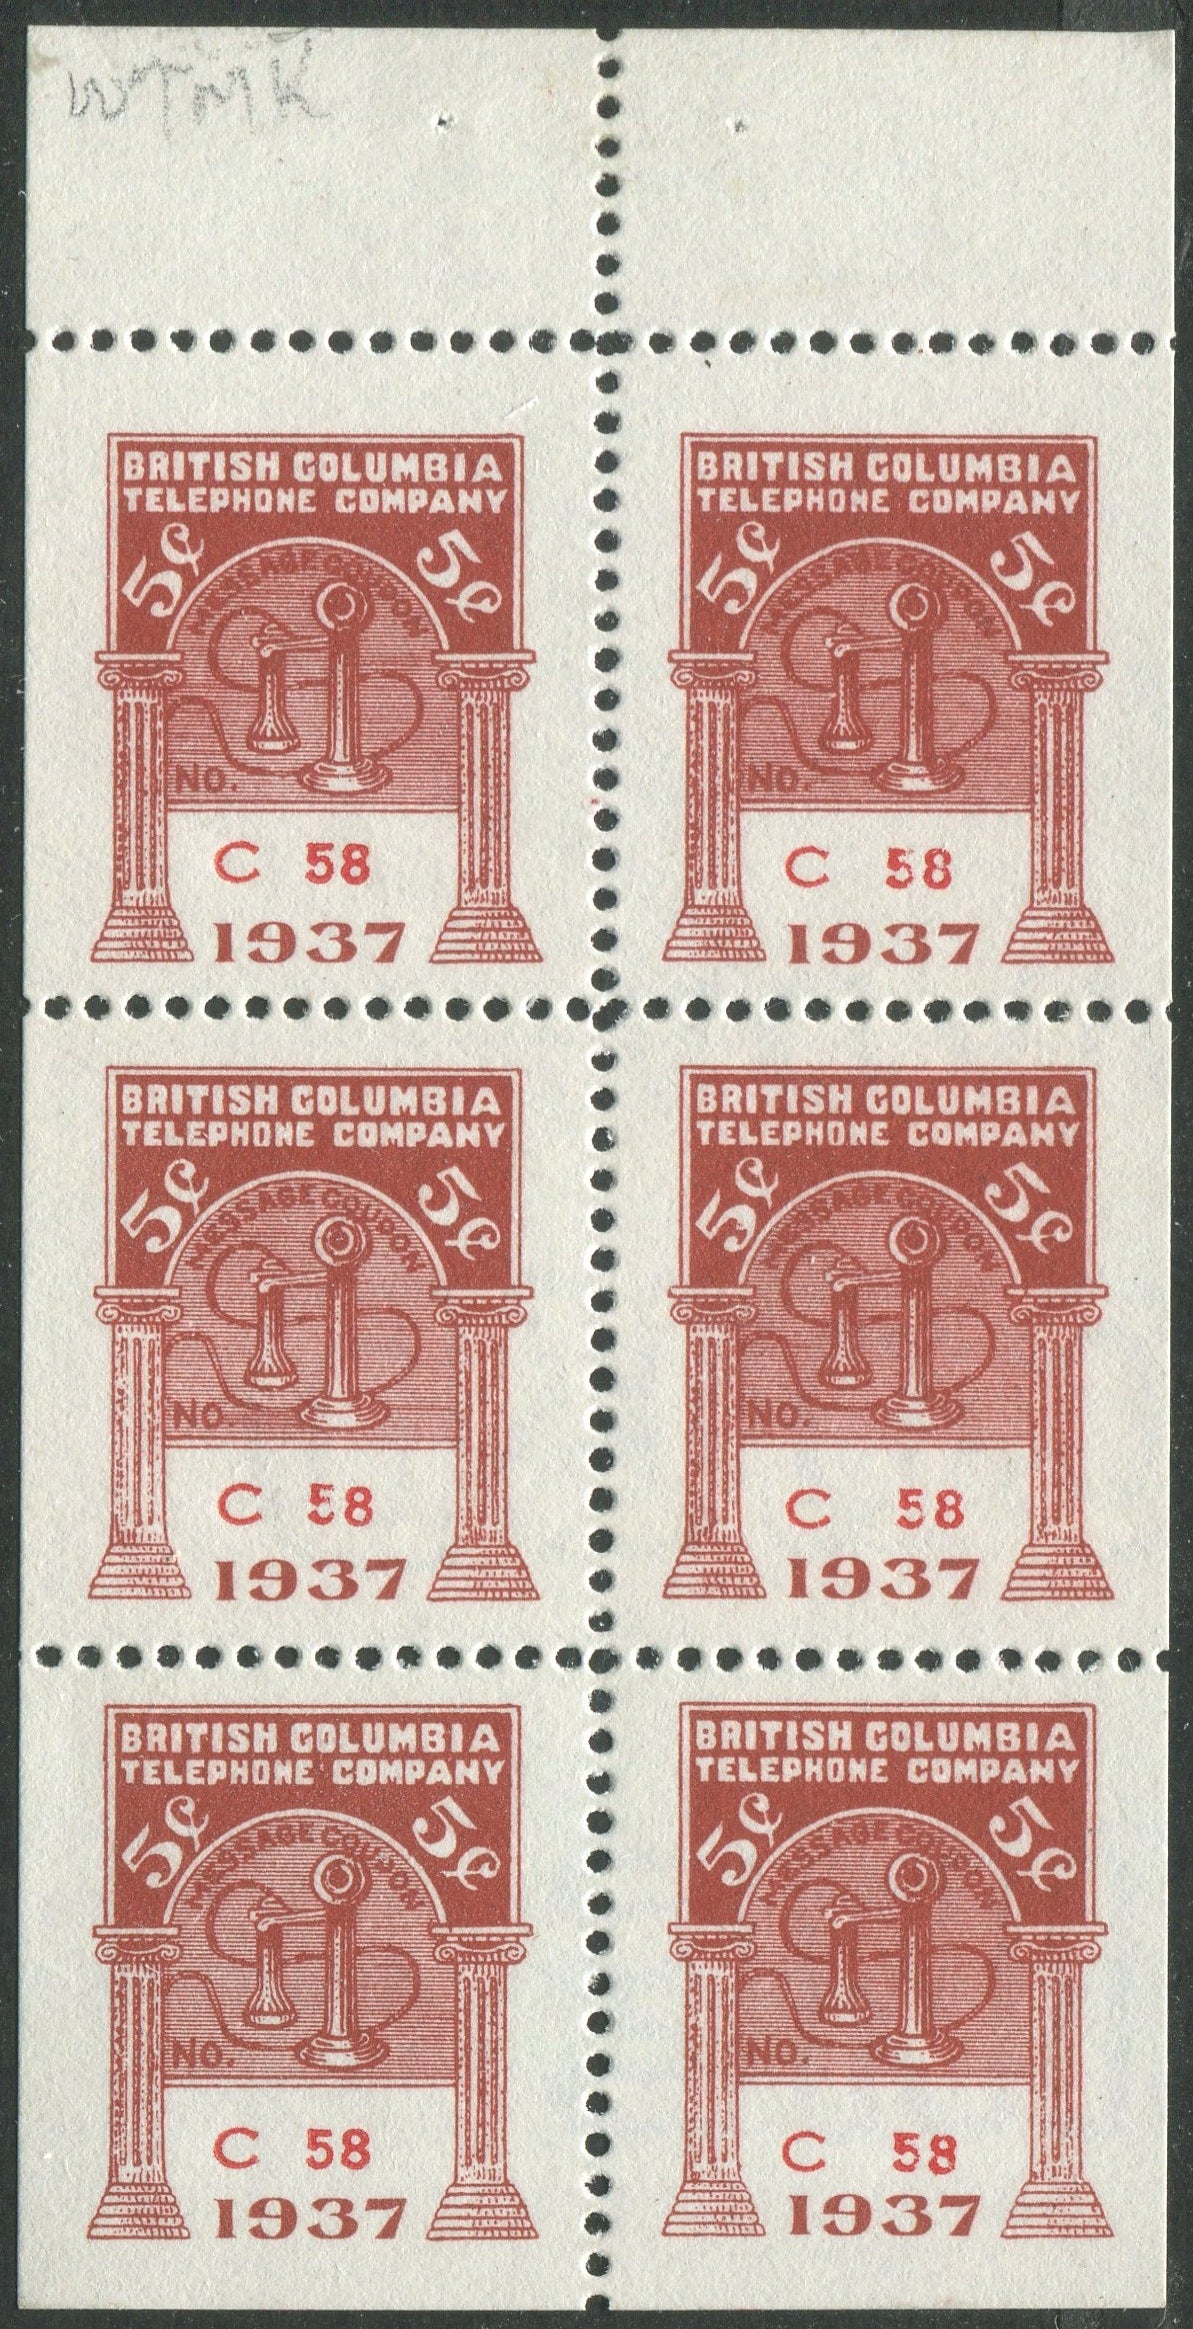 0219BC2010 - BCT121 - Mint Booklet Pane, Watermarked